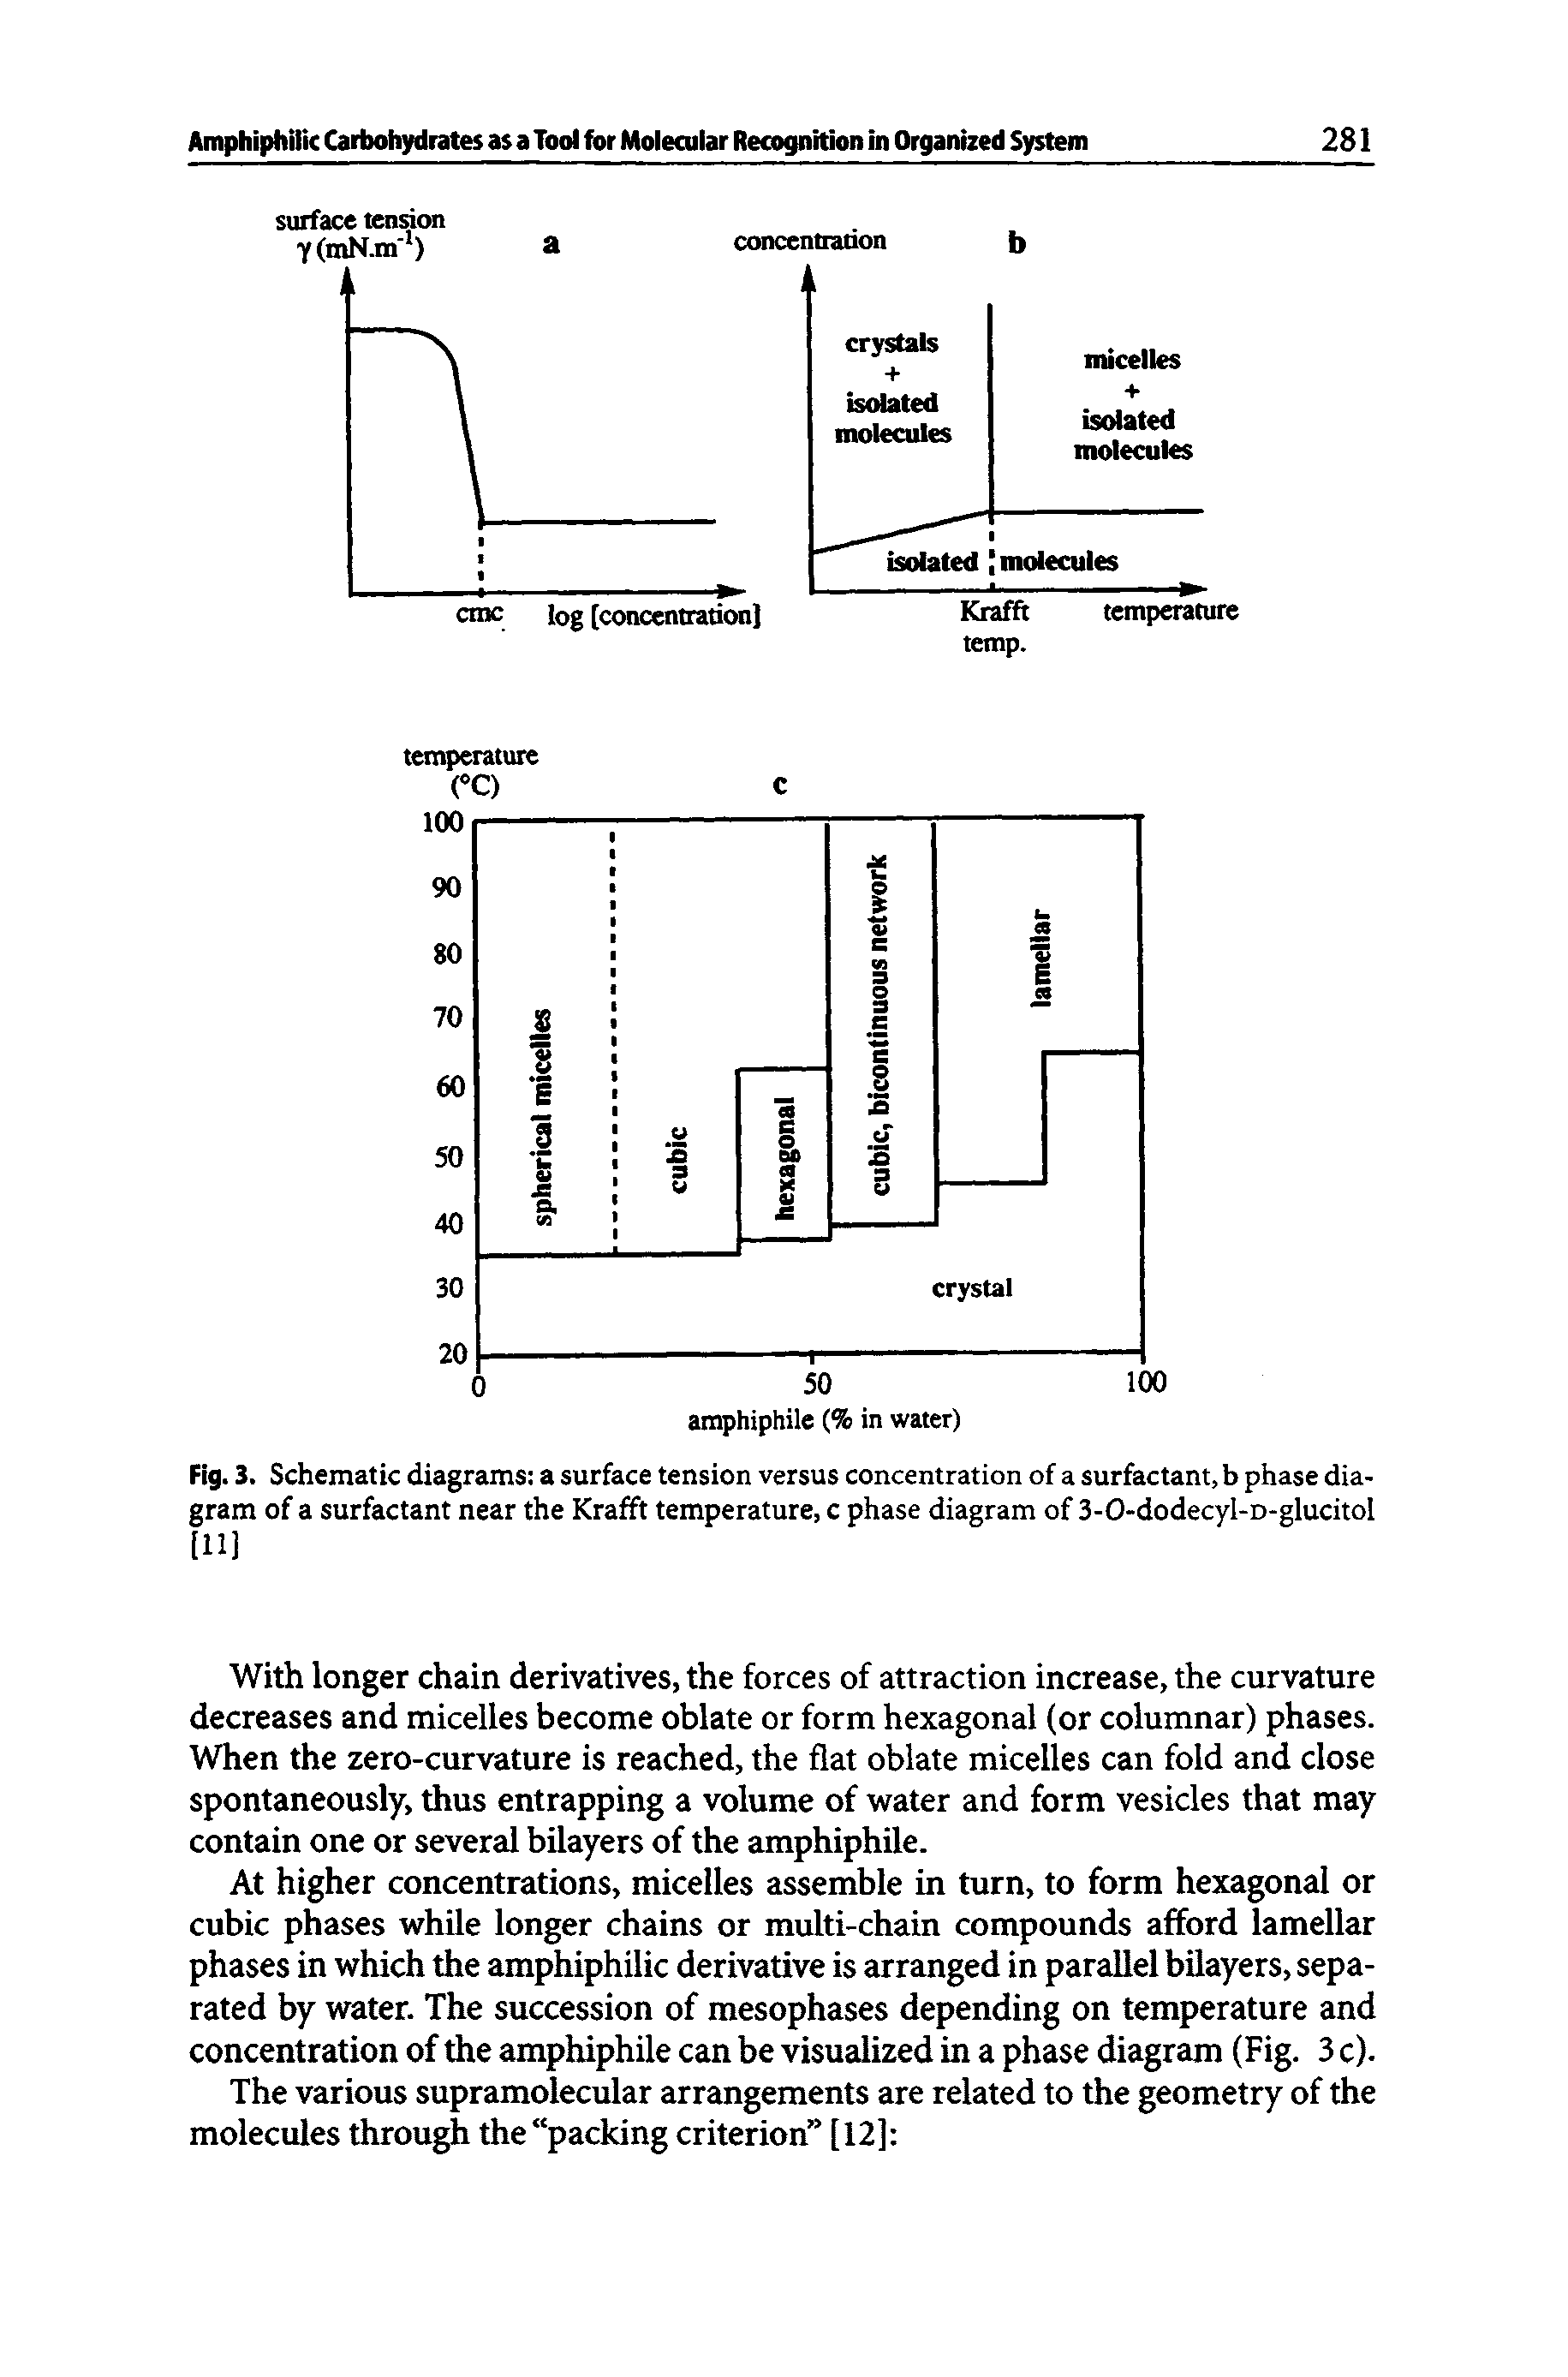 Fig. 3. Schematic diagrams a surface tension versus concentration of a surfactant, b phase diagram of a surfactant near the Krafft temperature, c phase diagram of 3-0-dodecyl-D-glucitol [11]...